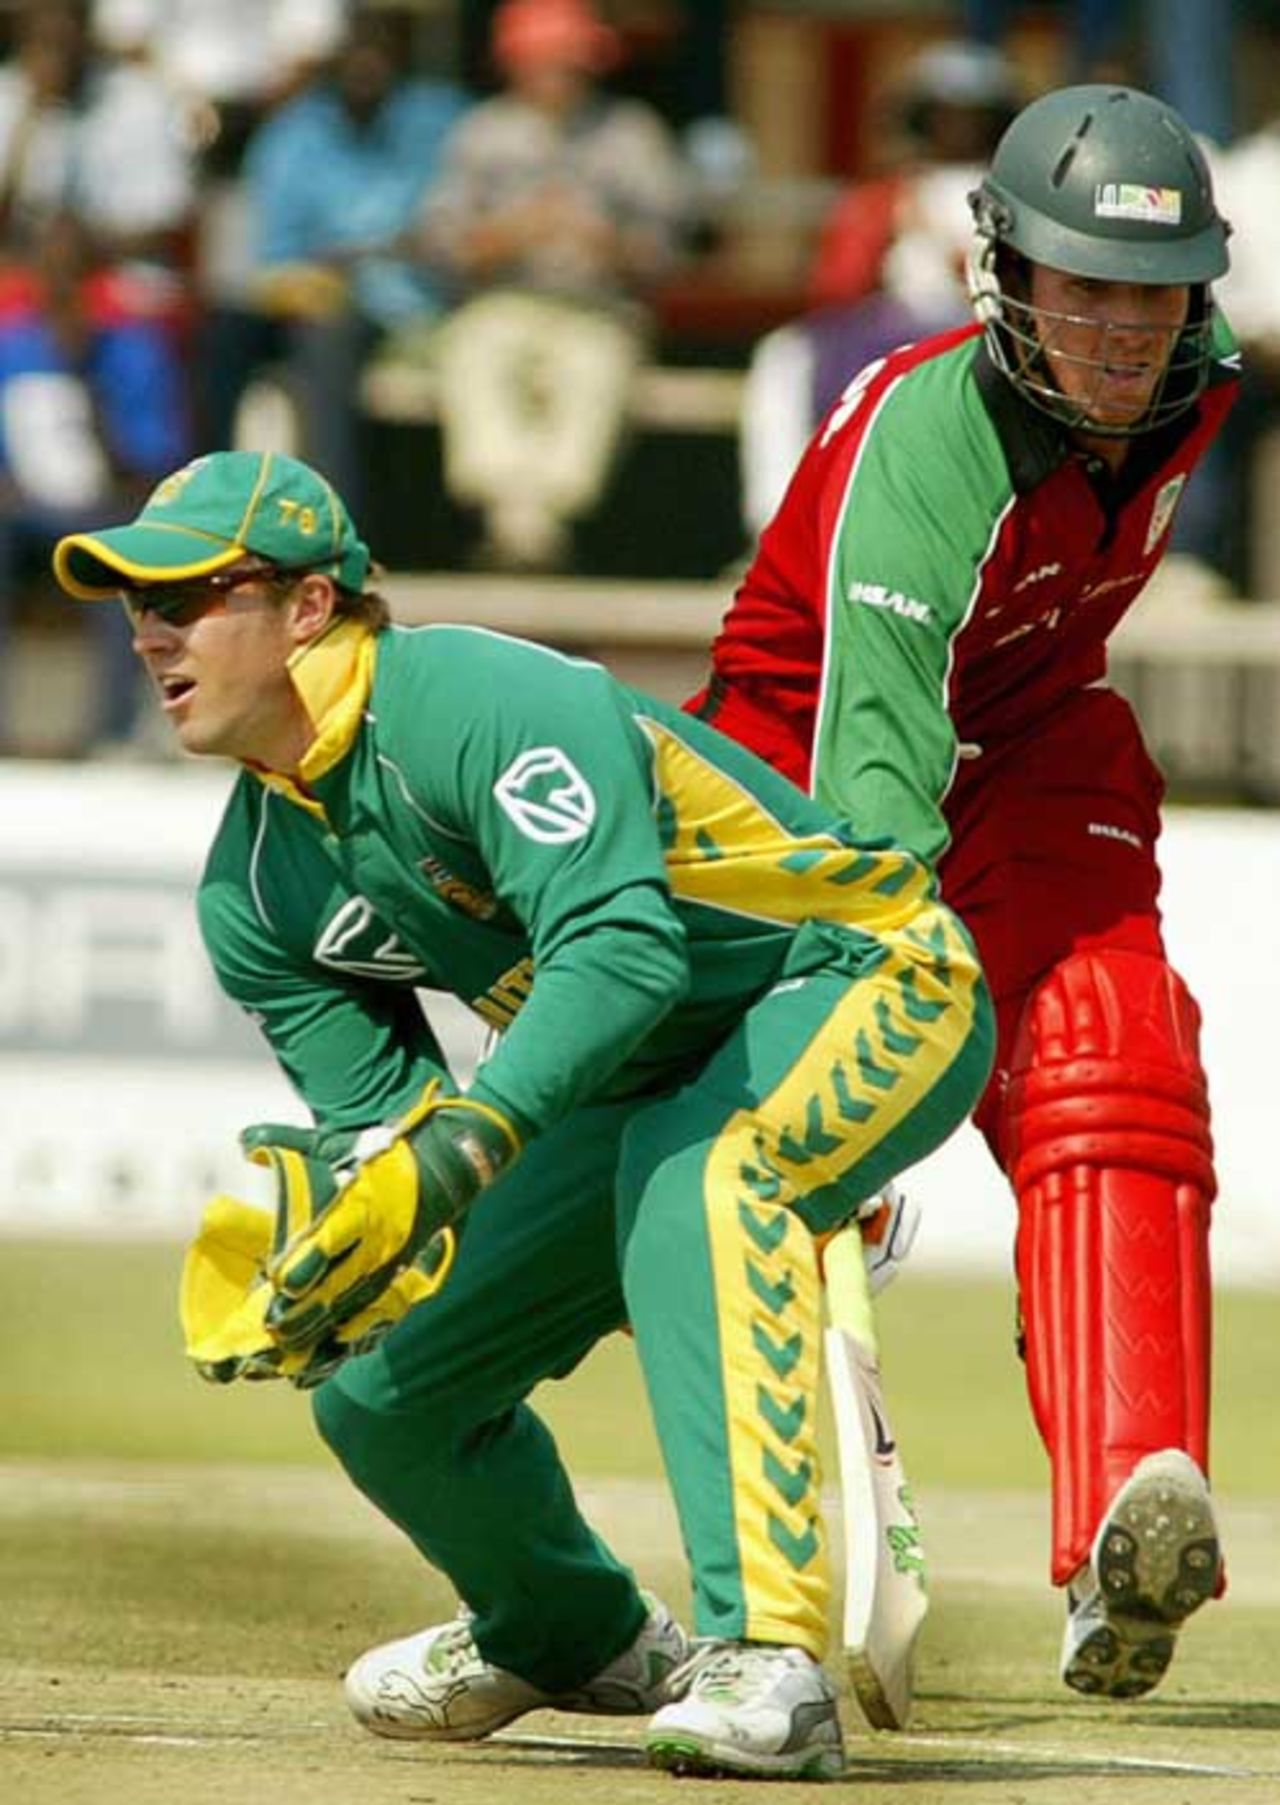 Brendan Taylor completes a run while AB De Villiers waits to collect the throw, Zimbabwe v South Africa, 2nd ODI, Harare, August 25, 2007